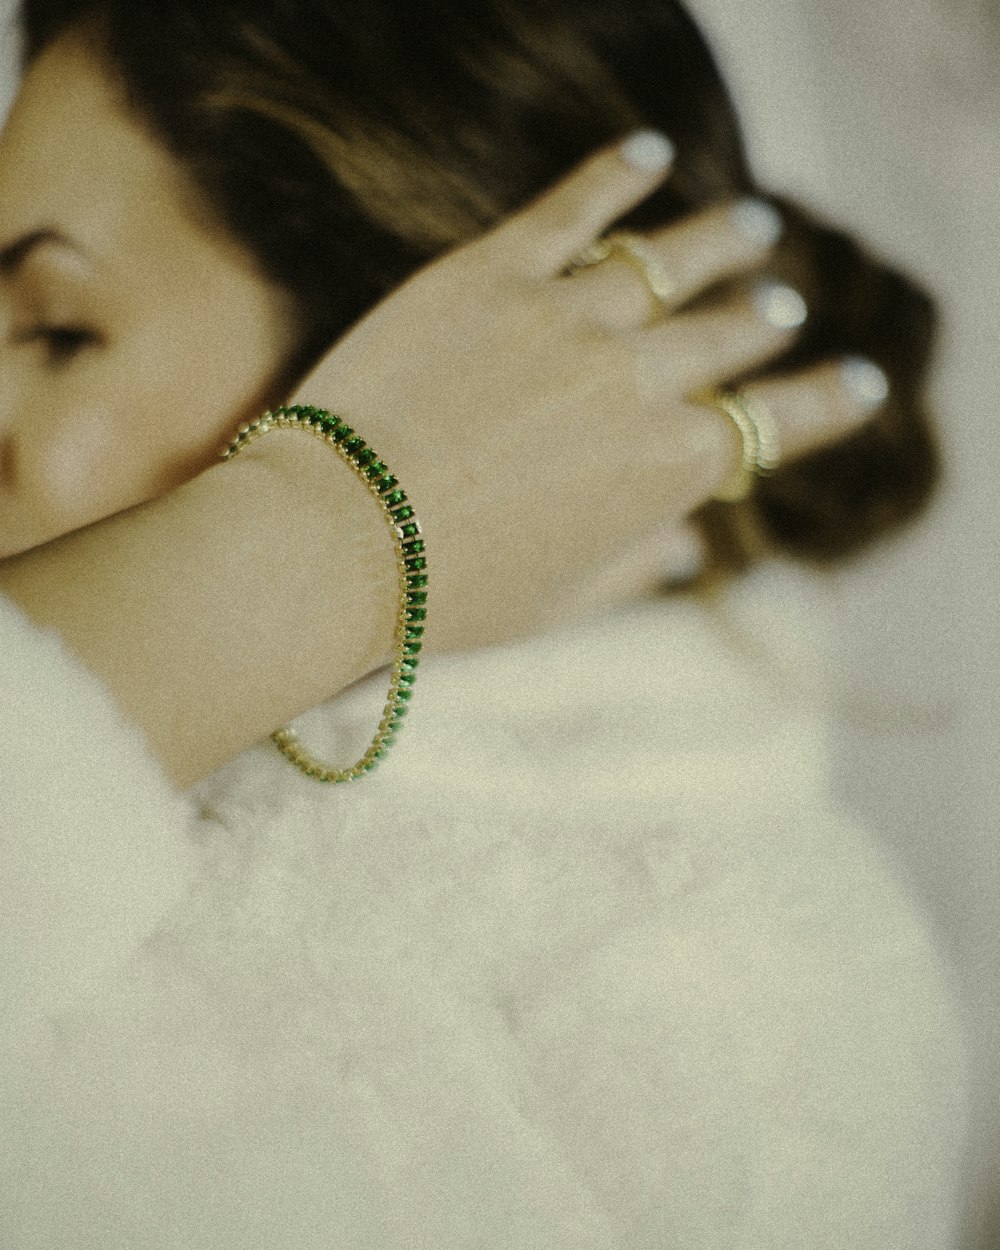 a woman wearing a bracelet and a ring